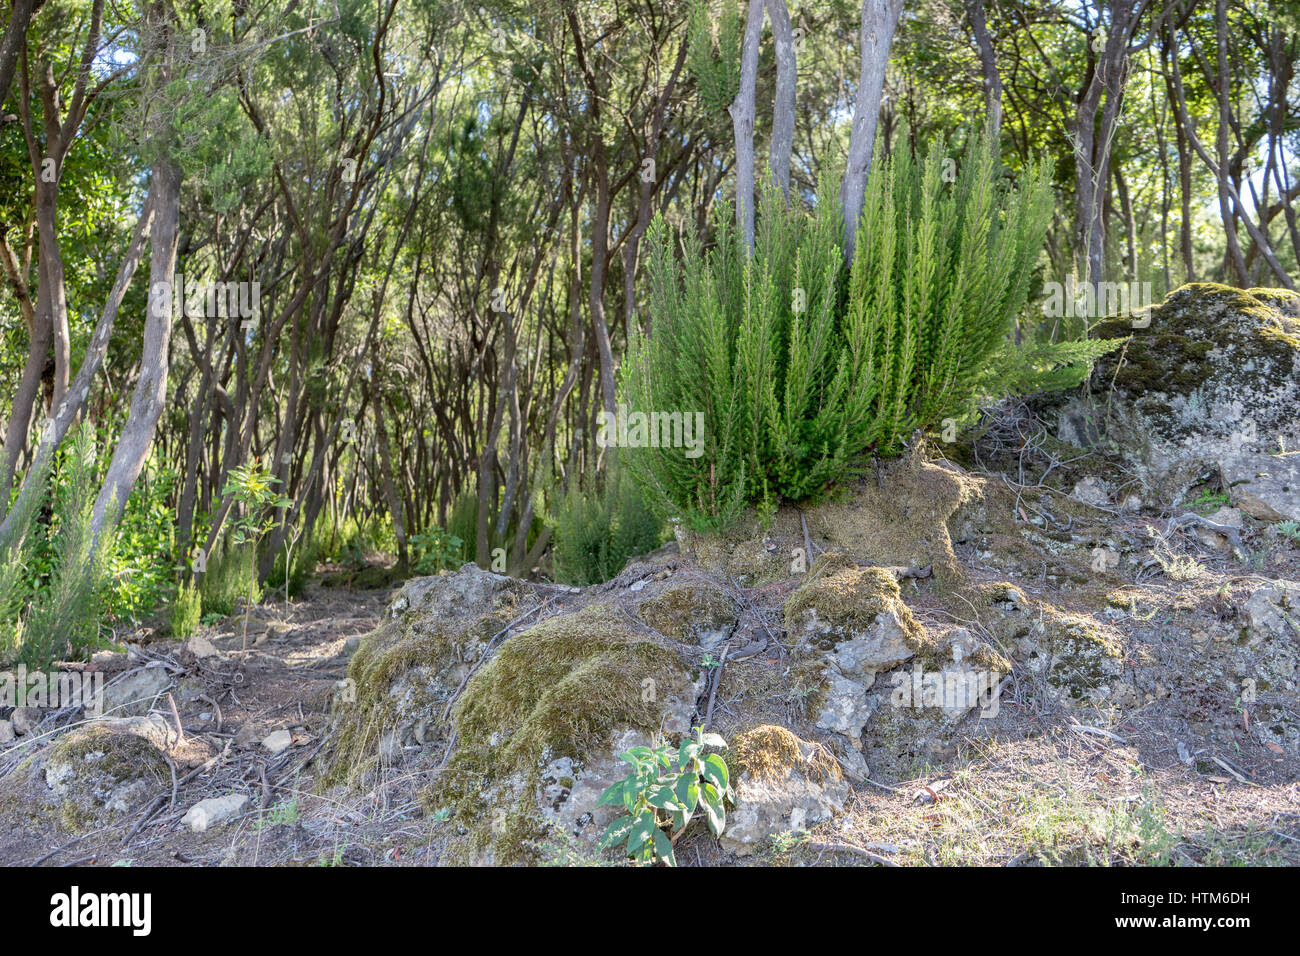 Vegetation in Tenerife with heather chewing trees Stock Photo